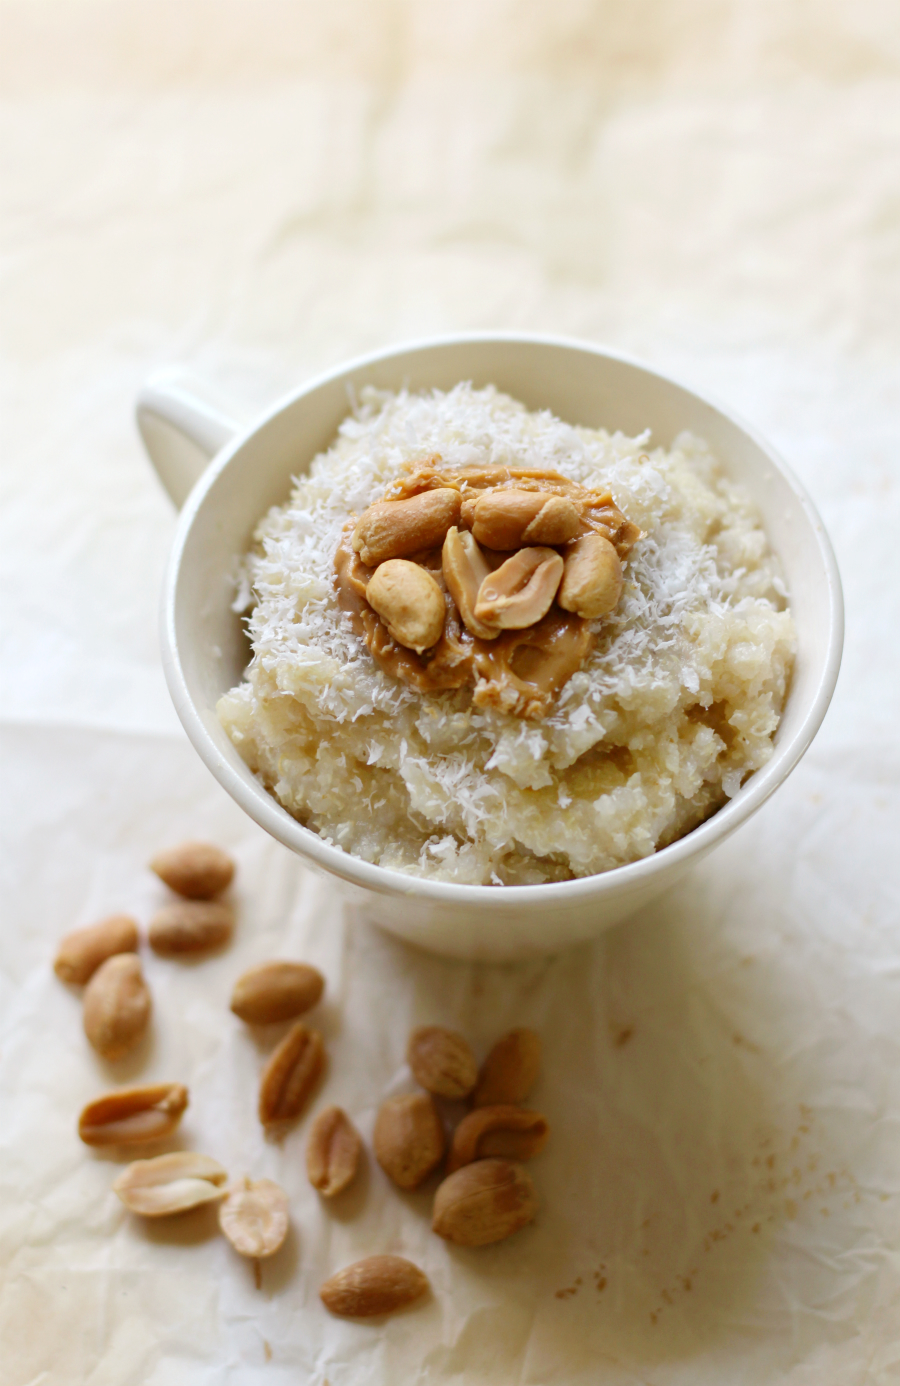 Coconut Peanut Quinoa Flakes | Strength and Sunshine @RebeccaGF666 A fun flavor combination for a quick & easy healthy breakfast recipe! Coconut Peanut Quinoa Flakes are gluten-free, vegan, and done in the microwave. A bowl of pure plant-based protein and healthy fats to fuel you all day long!